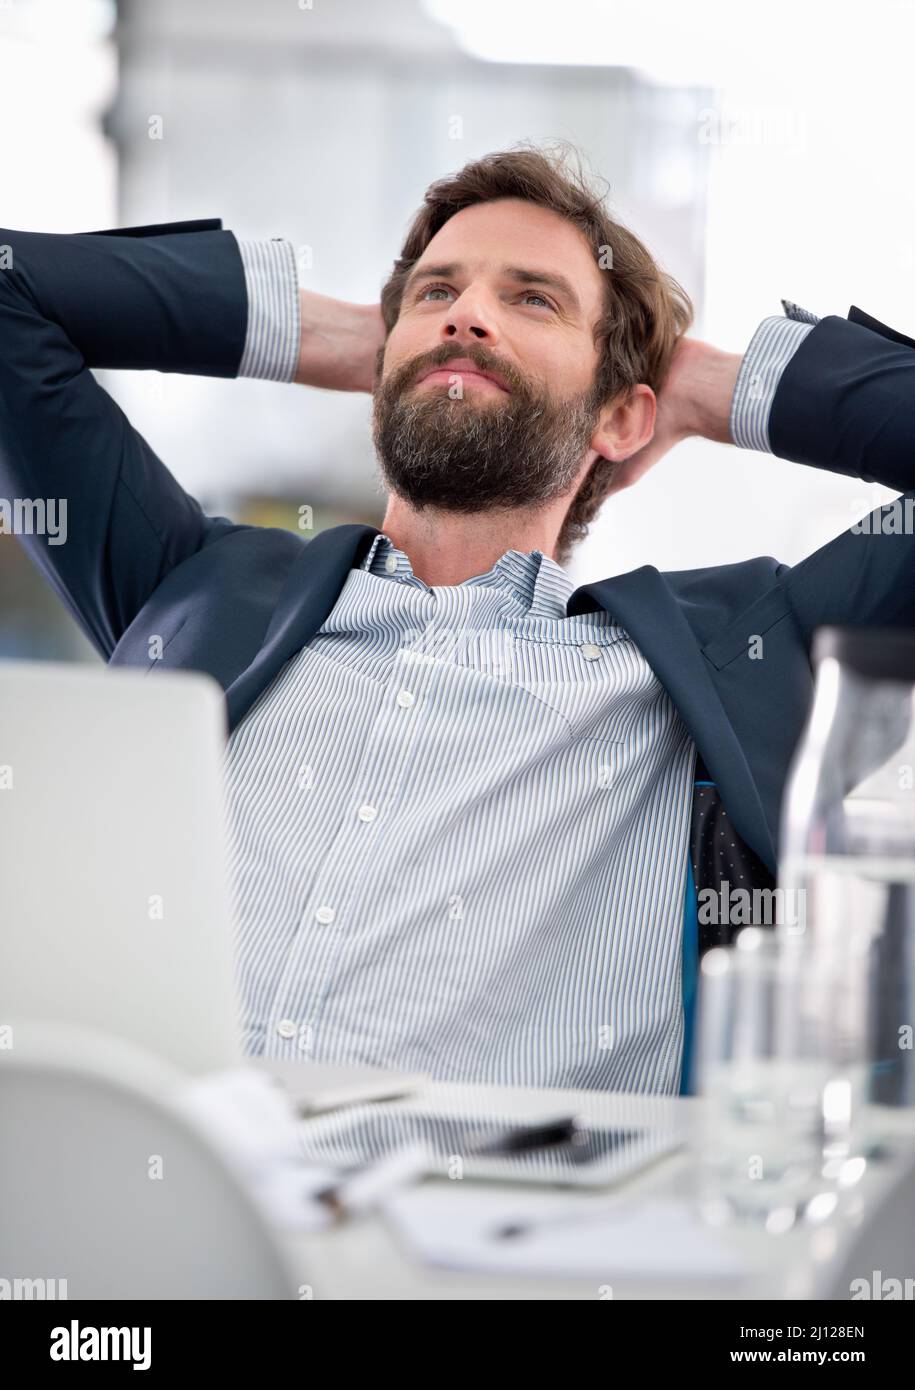 Dreaming big.... Shot of a young businessman looking thoughtful while sitting at his office desk. Stock Photo